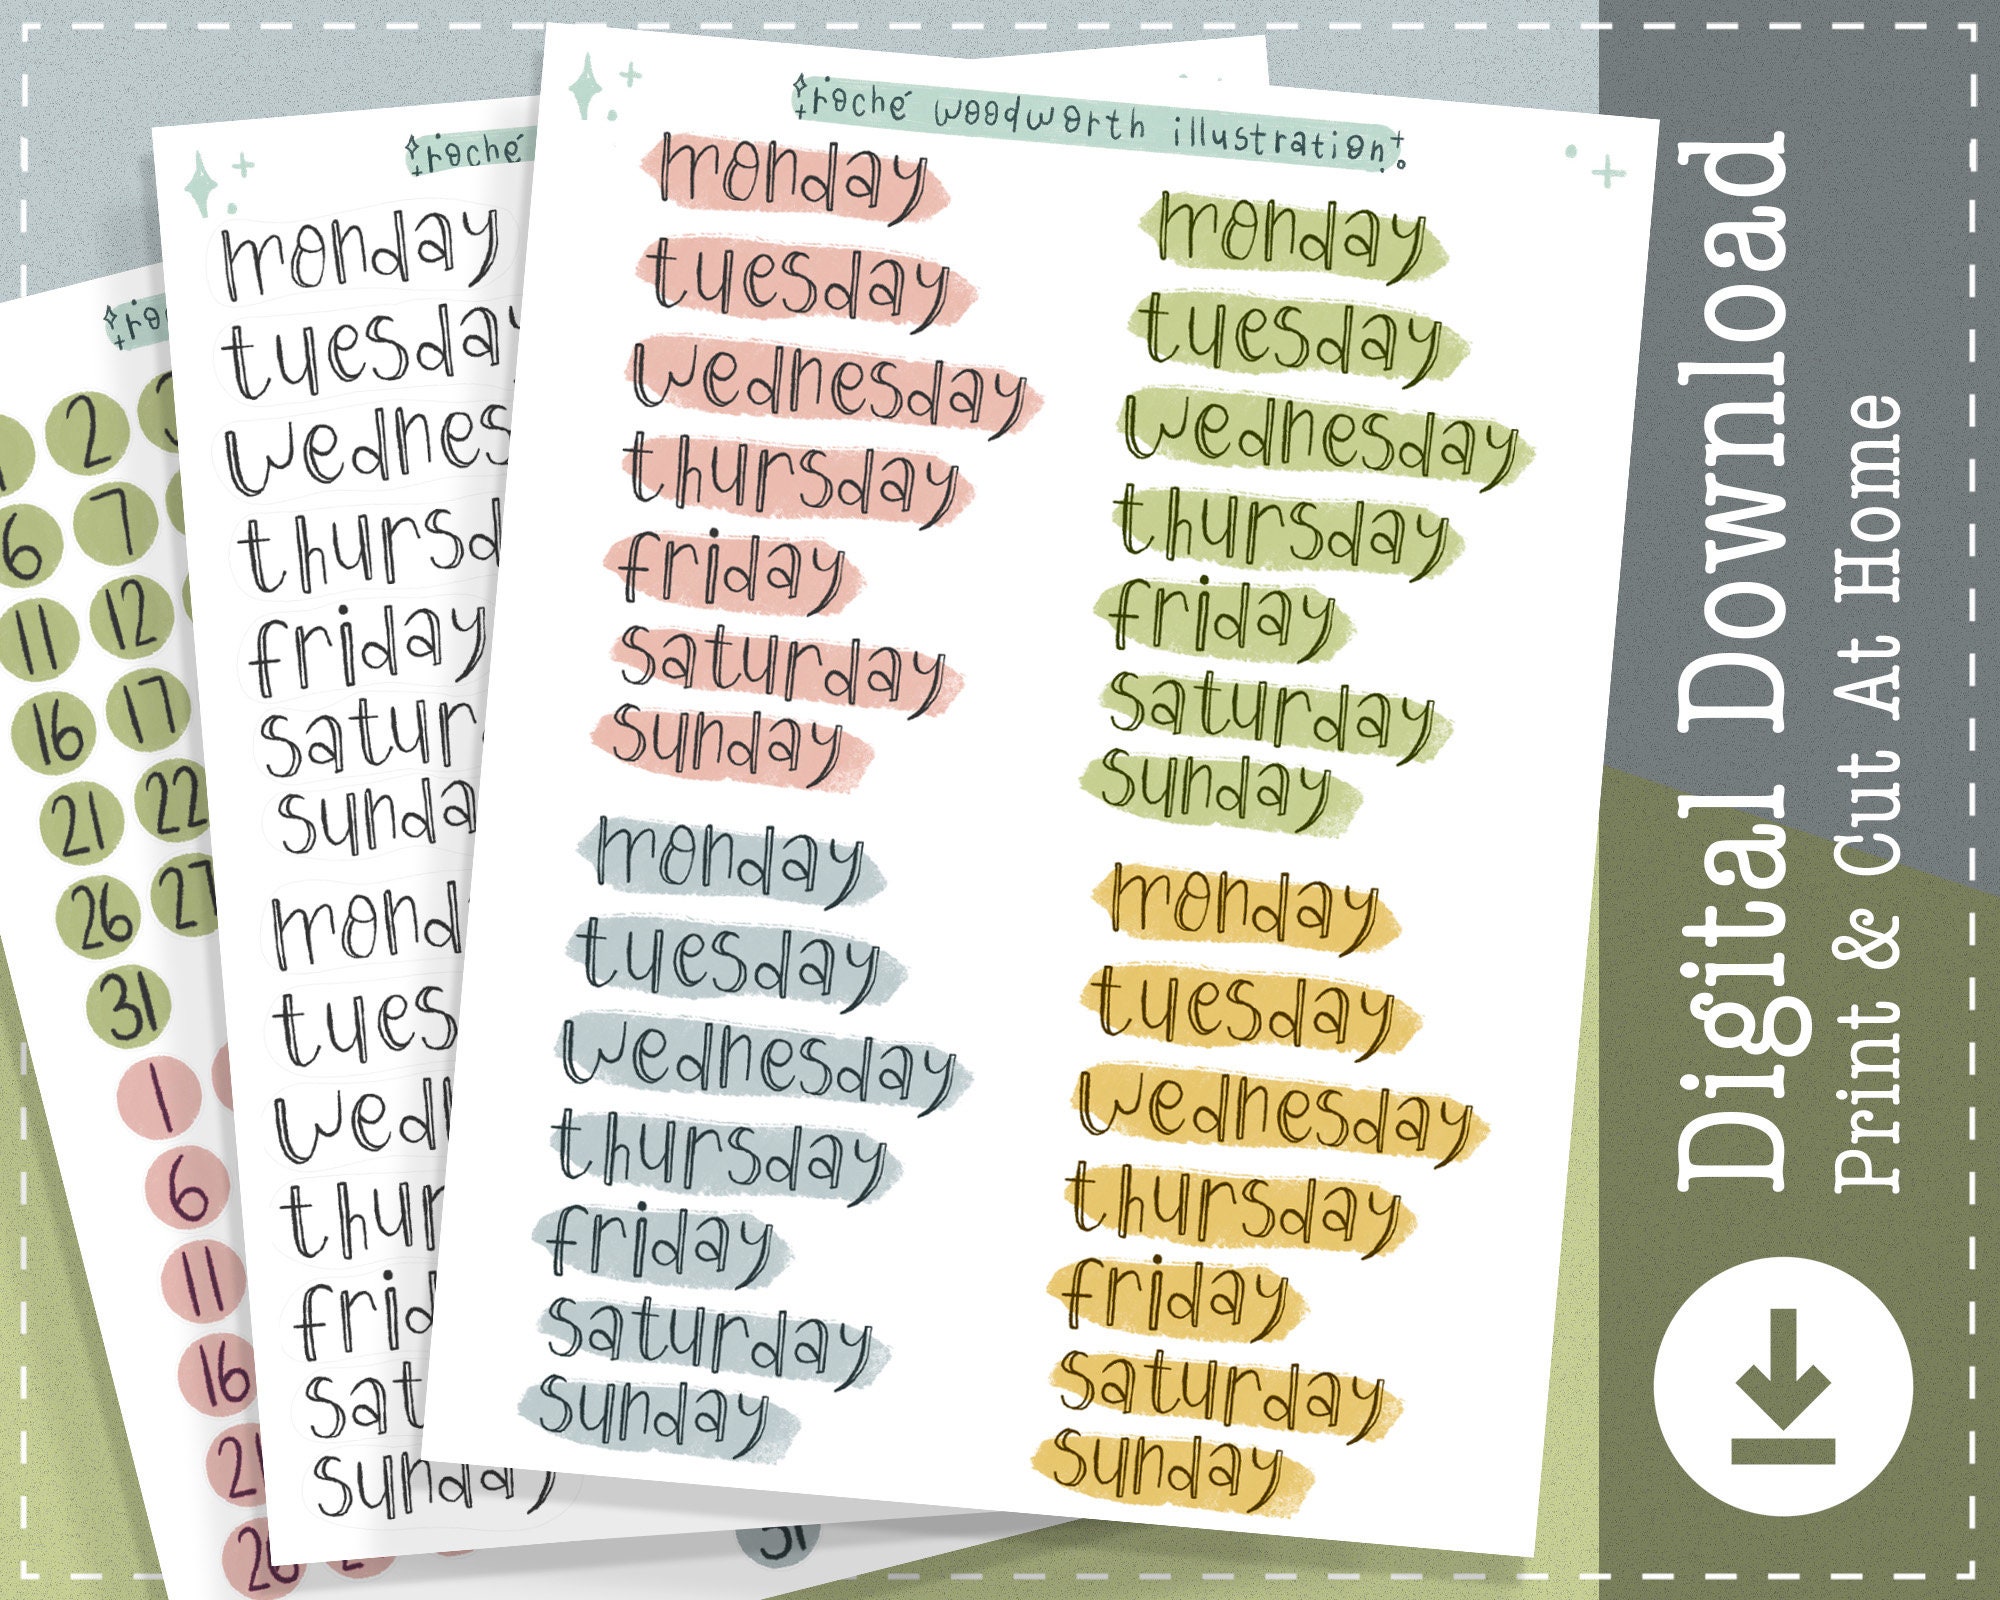 Days of the Week Stickers, Weekday Stickers, Planner Stickers, Happy  Planner Stickers, Erin Condren Stickers, Hand Lettering Stickers, 183 